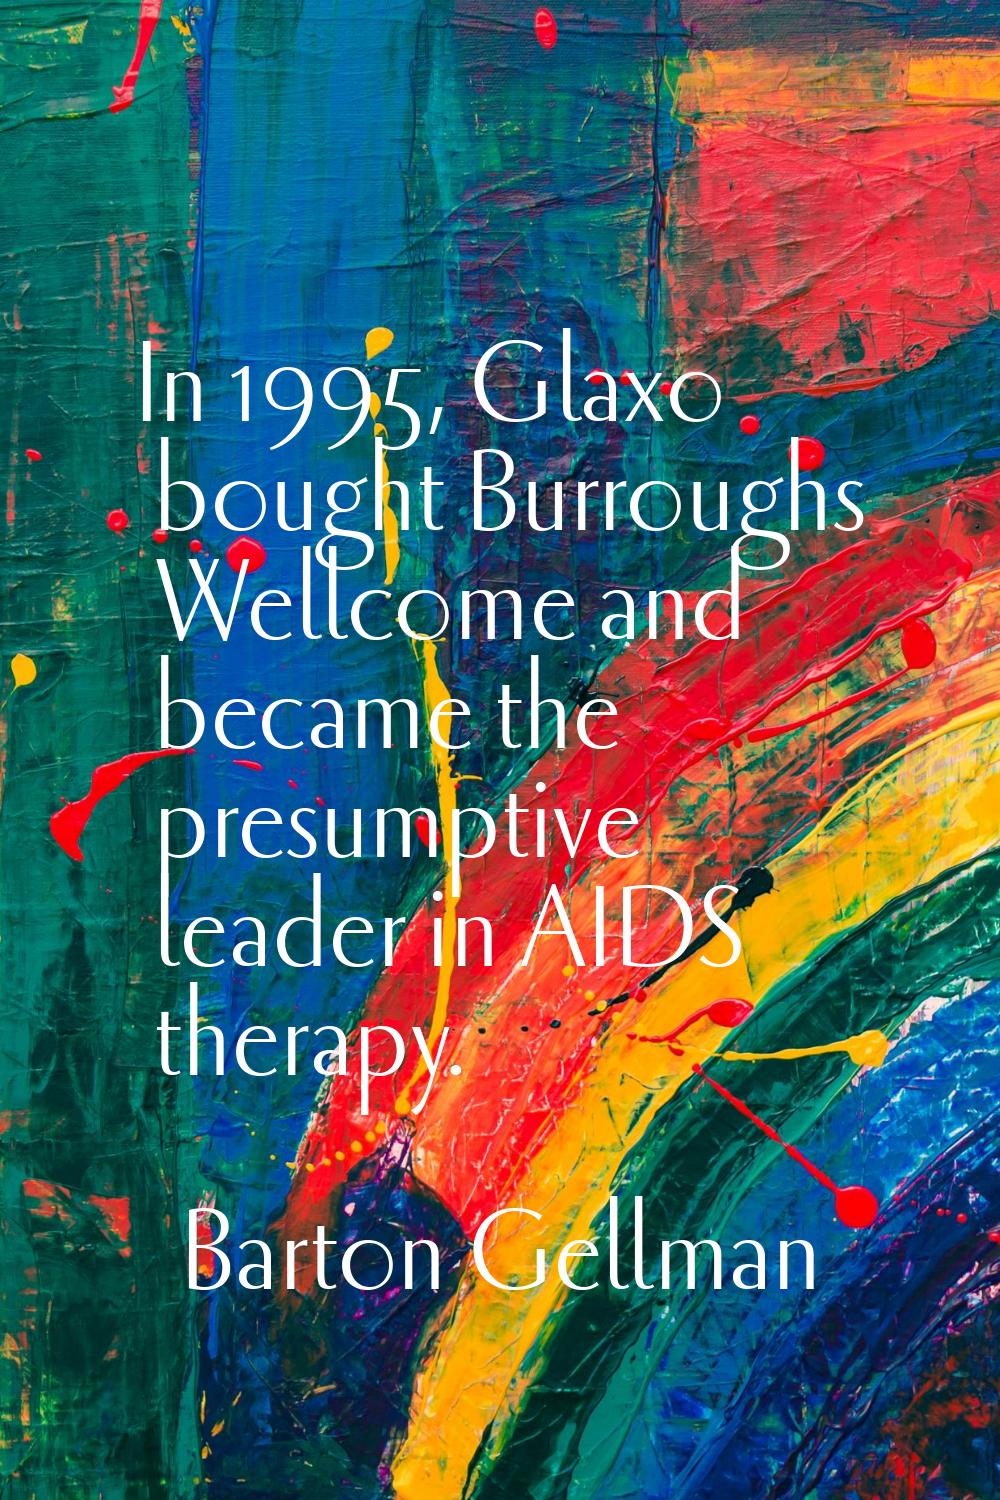 In 1995, Glaxo bought Burroughs Wellcome and became the presumptive leader in AIDS therapy.